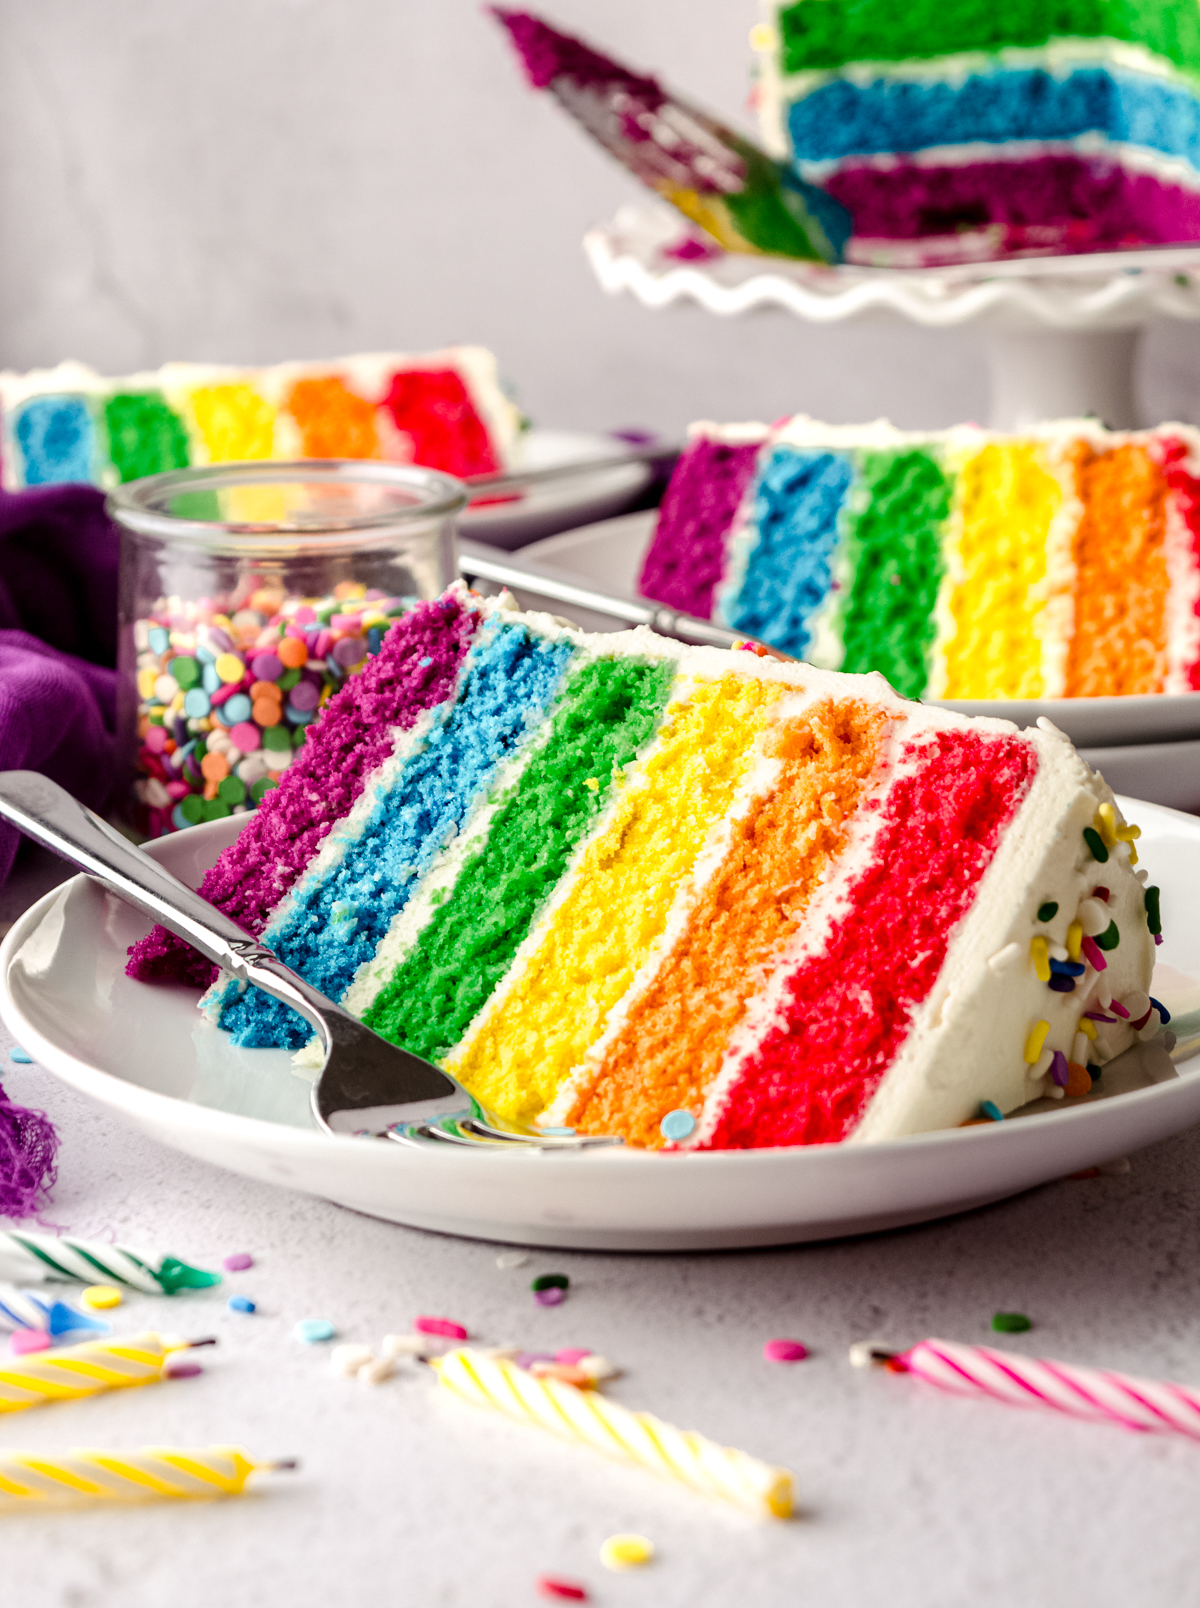 A slice of rainbow layer cake on a plate with a fork and sprinkles around it.